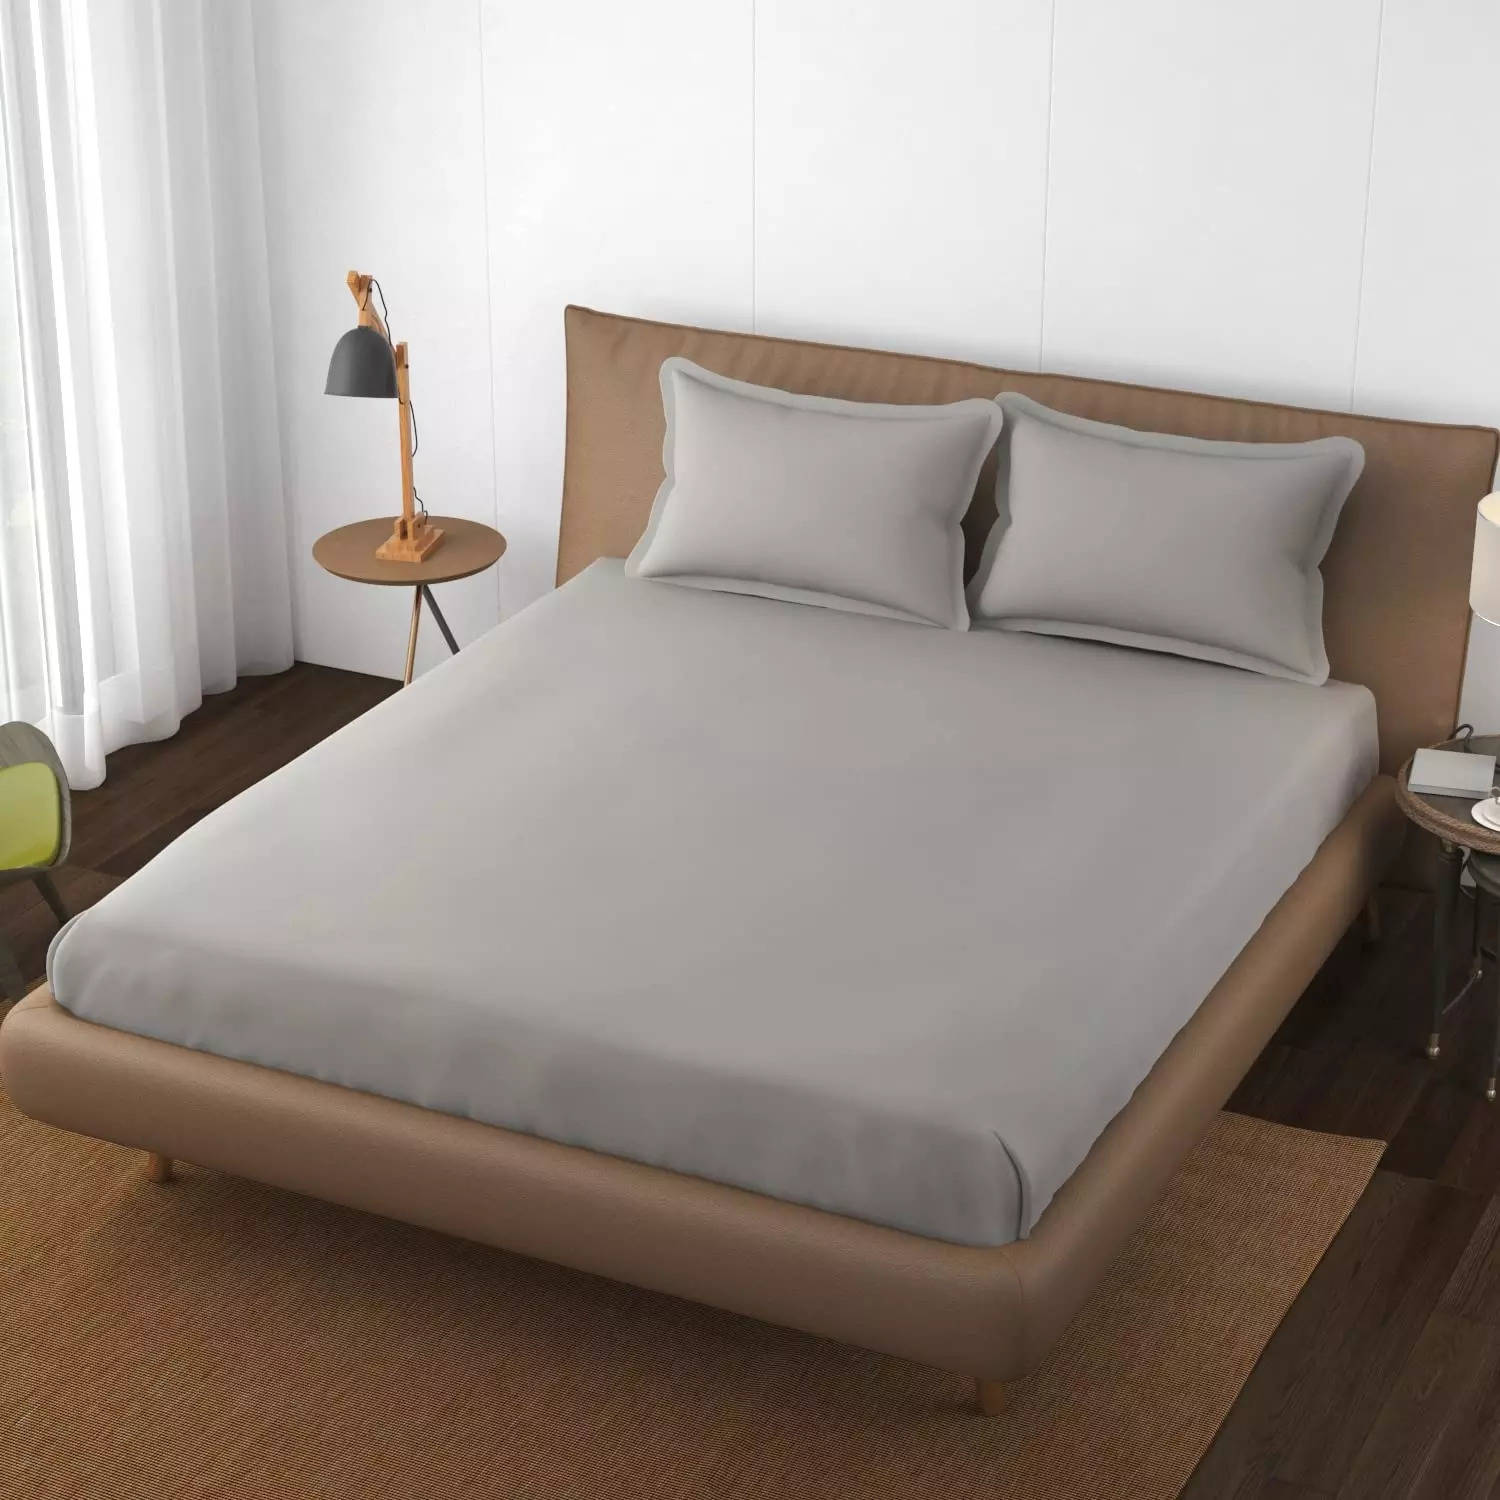 Fitted Bedsheet Supplier Near Me In Delhi, For Home at Rs 400